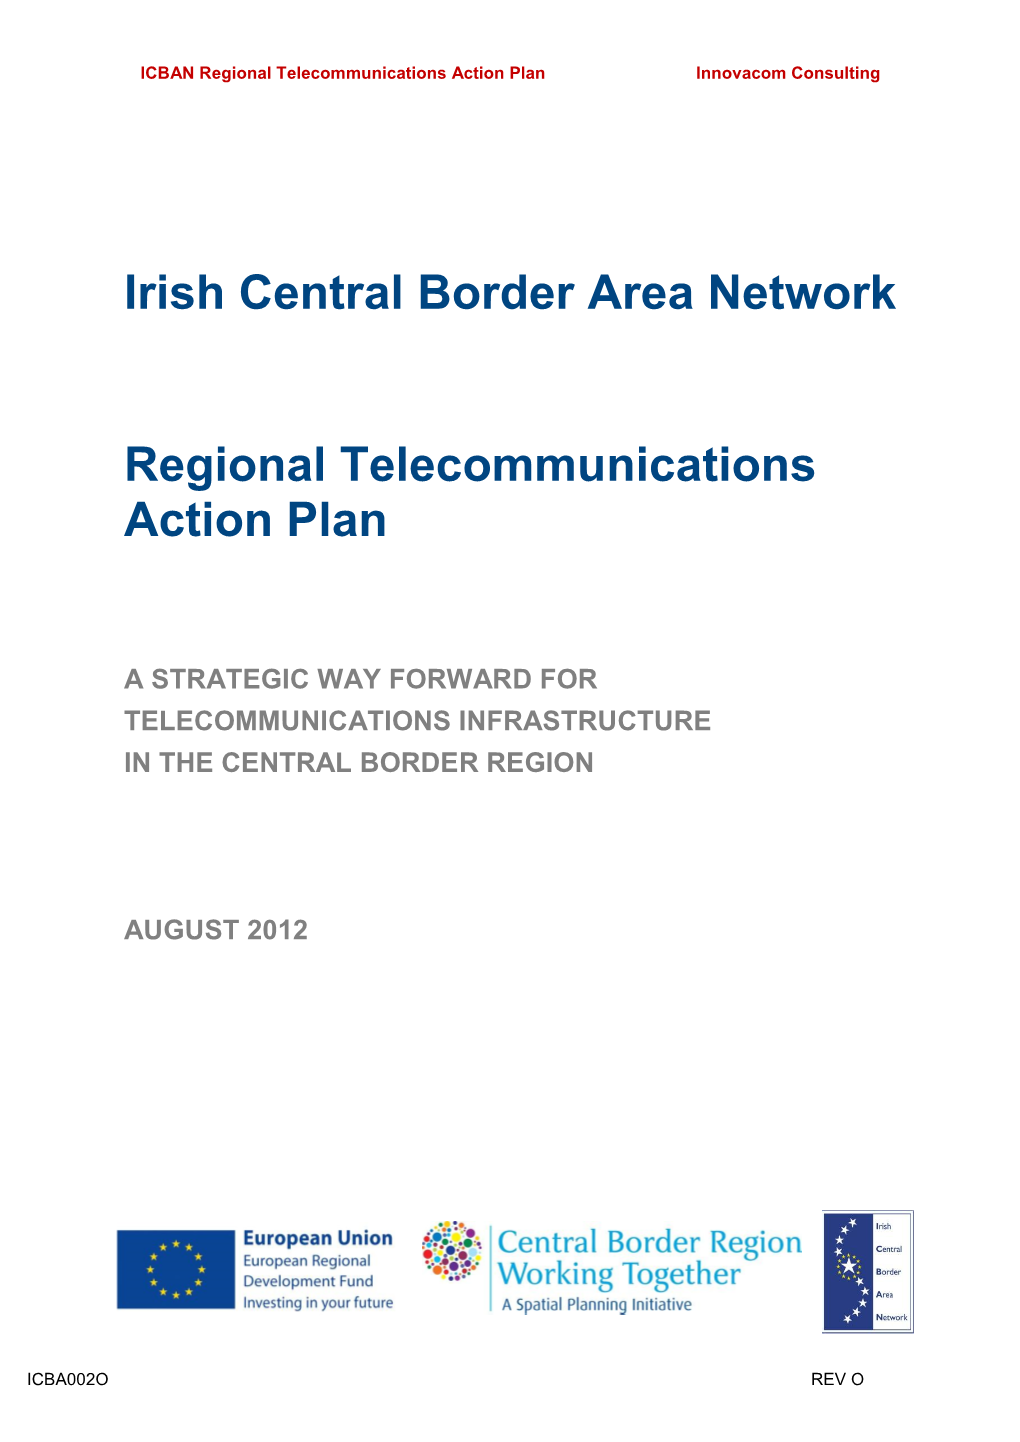 Regional Telecommunications Action Plan Innovacom Consulting